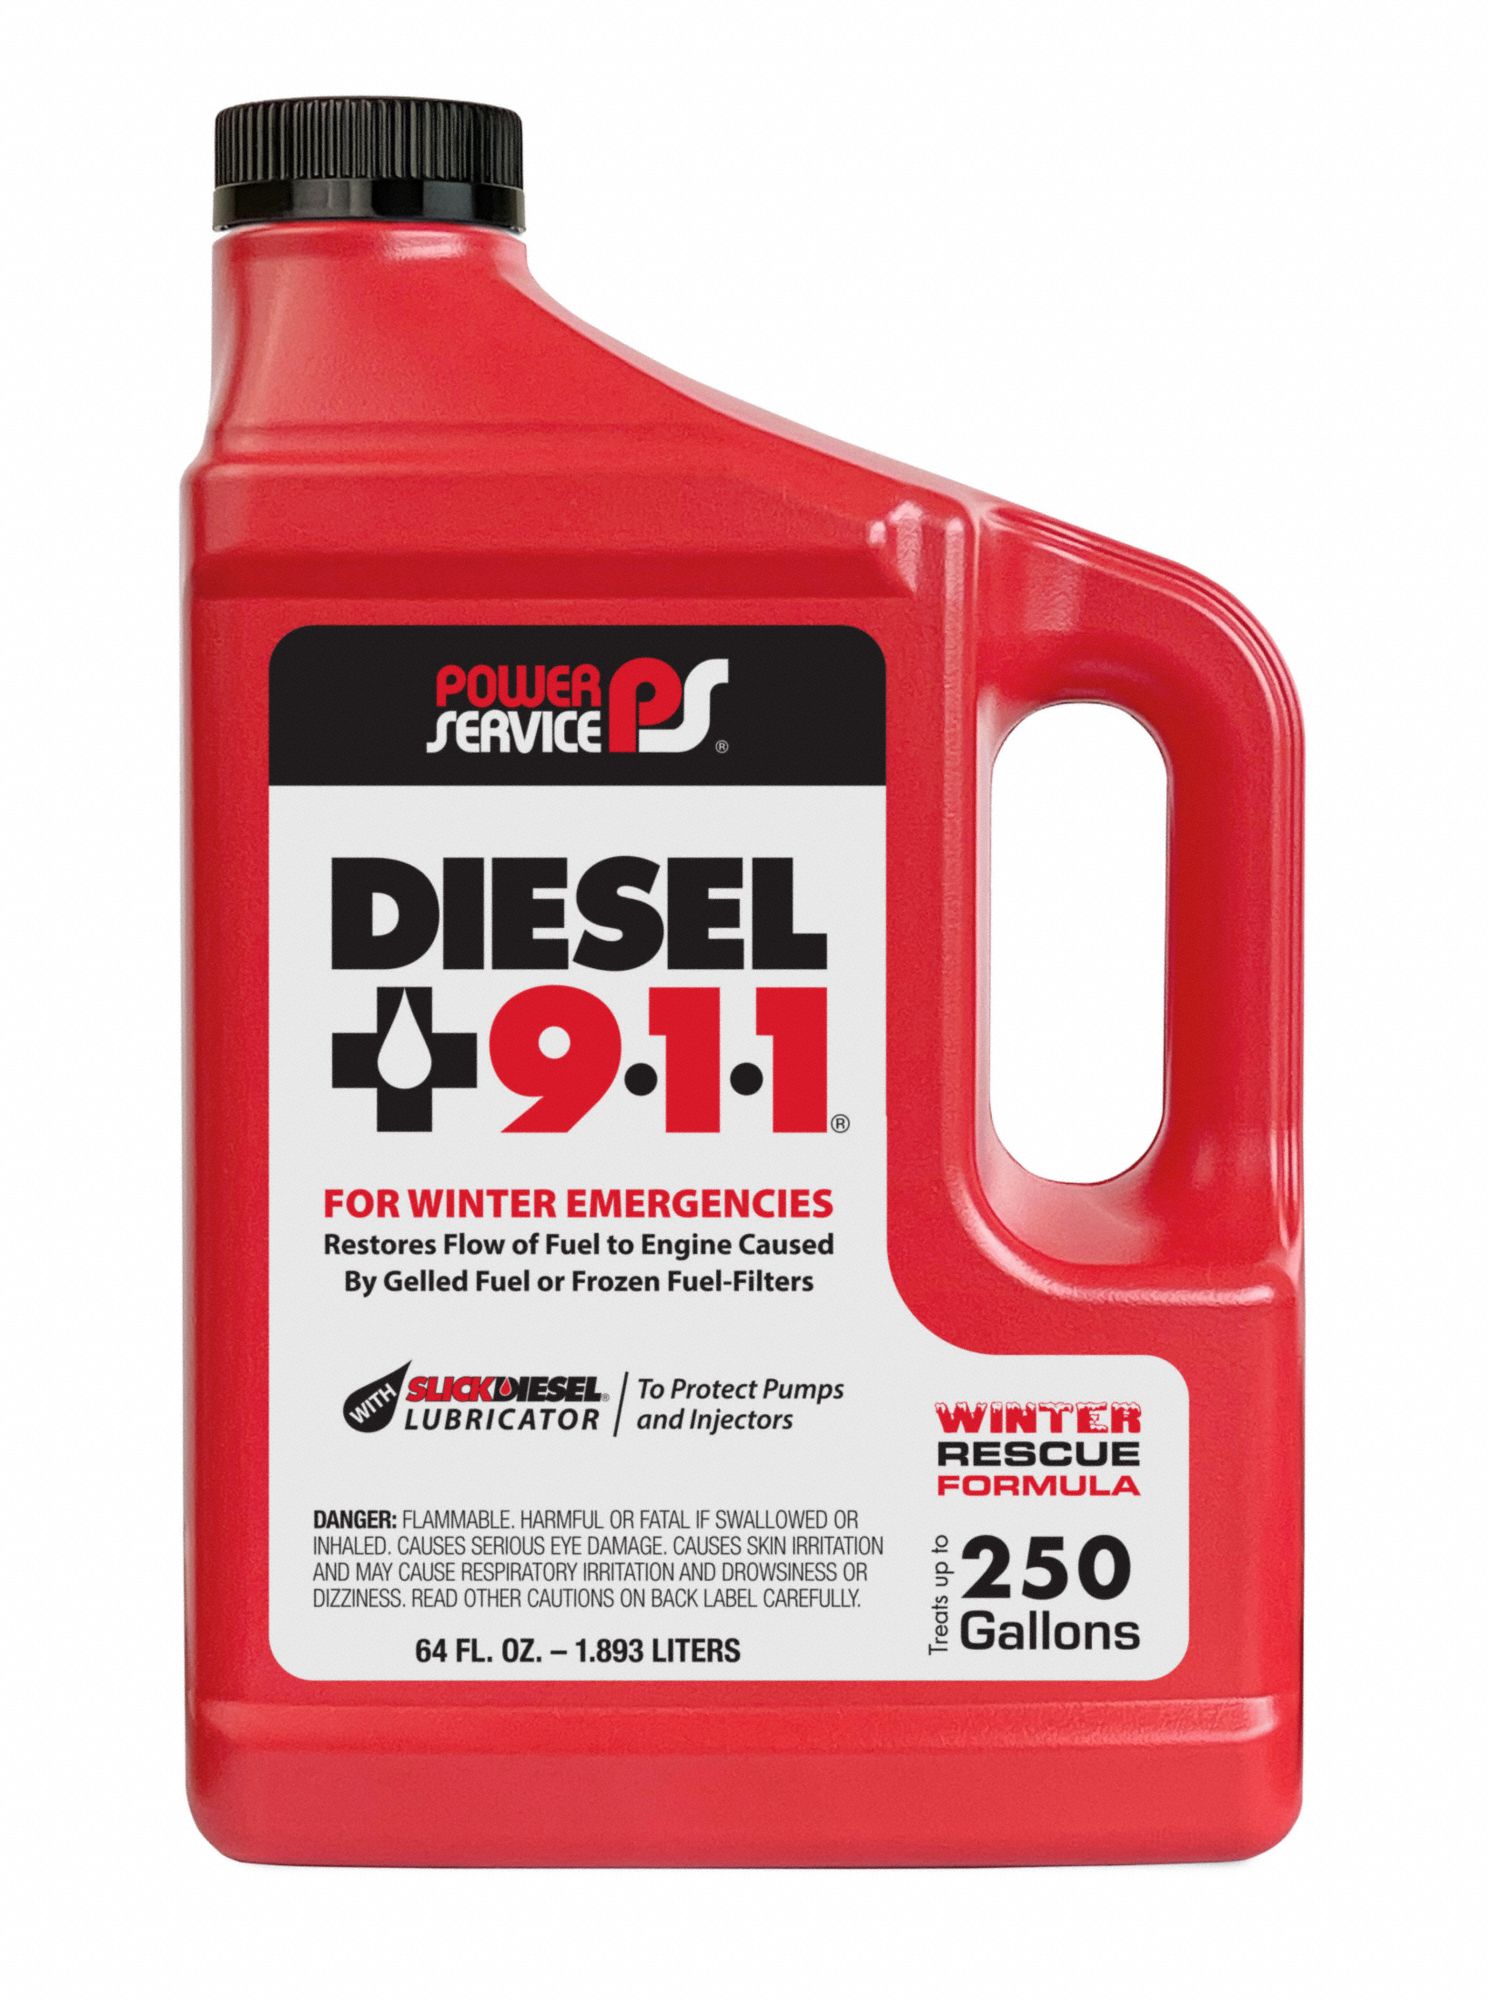 Gelled Diesel Fuel Additive: Fuel Additives and Stabilizers, 64 oz Size